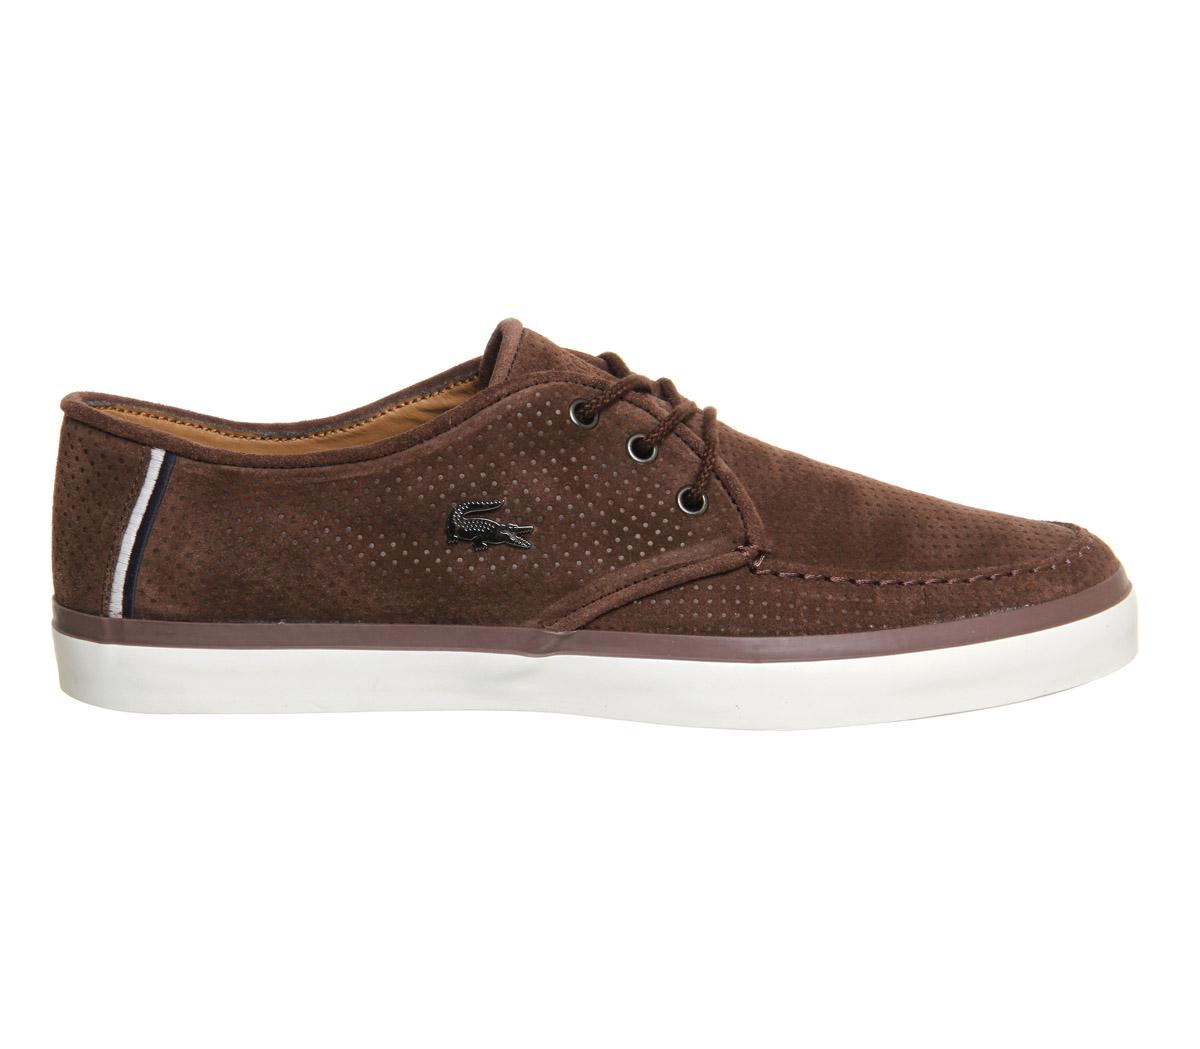 Lacoste Sevrin in Brown for Men - Lyst